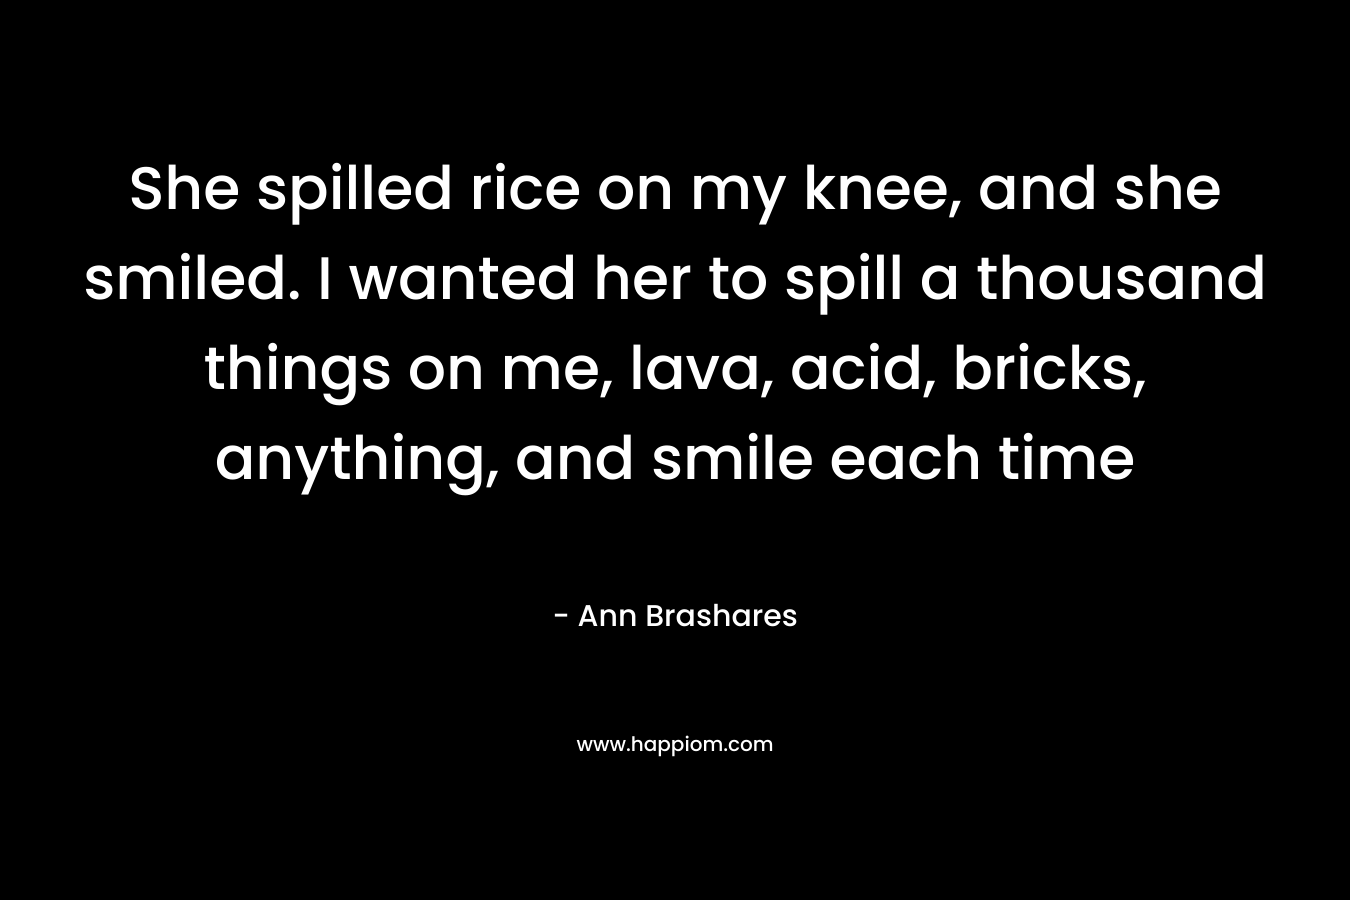 She spilled rice on my knee, and she smiled. I wanted her to spill a thousand things on me, lava, acid, bricks, anything, and smile each time – Ann Brashares